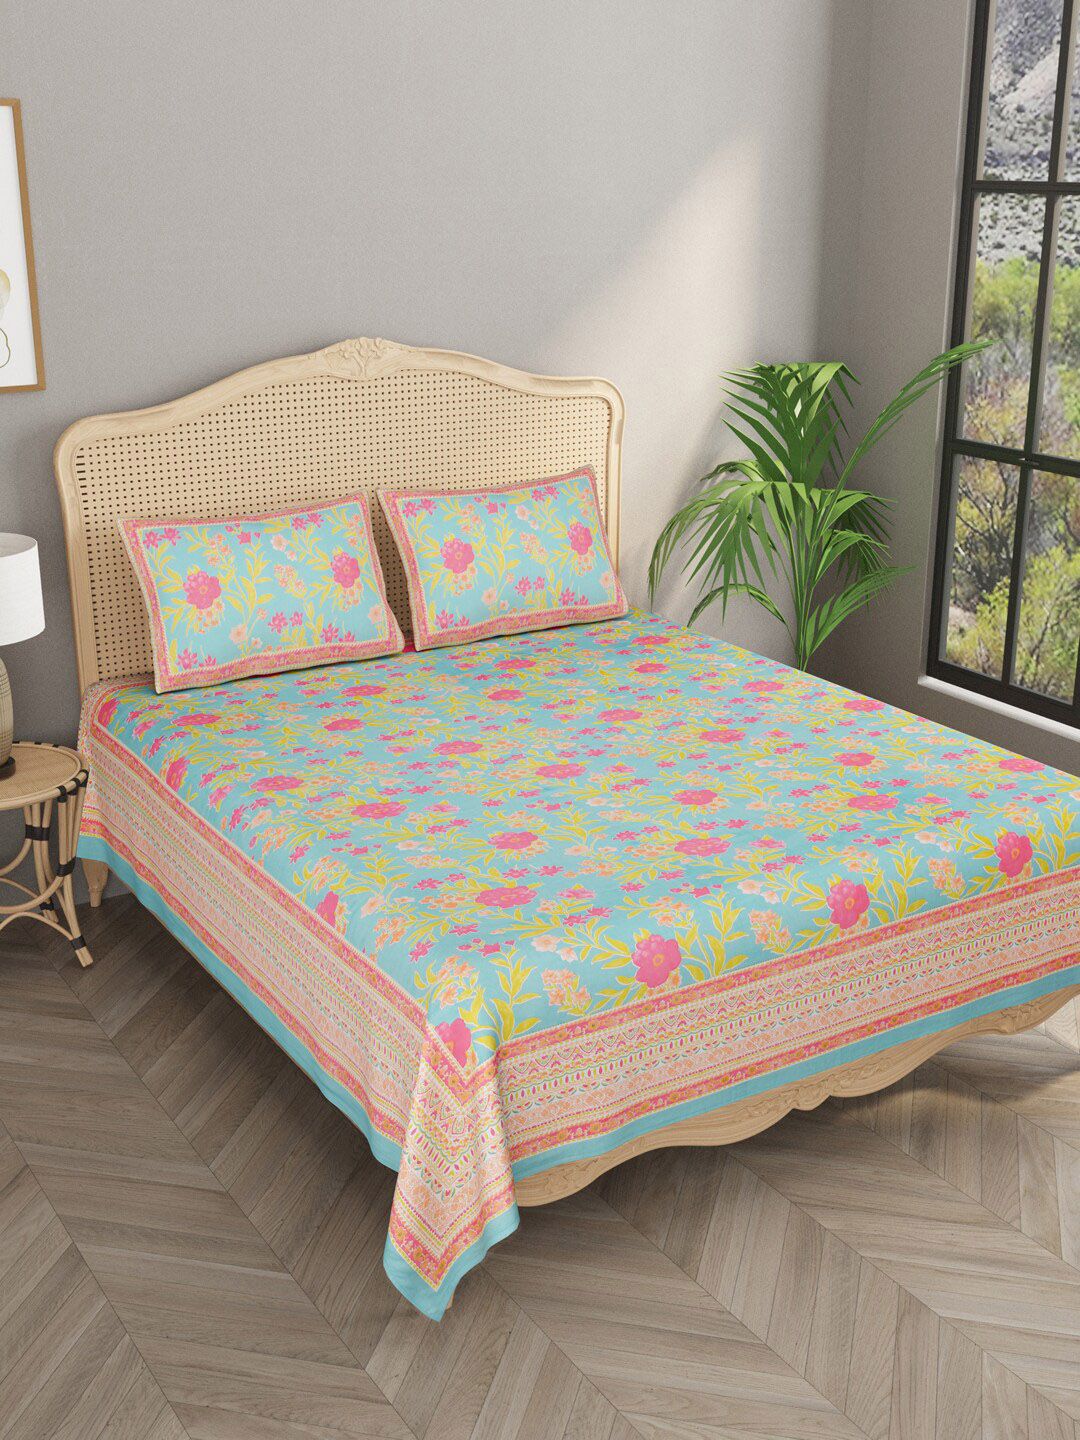 Gulaab Jaipur Blue & Pink Floral 600 TC Cotton King Bedsheet with 2 Pillow Covers Price in India